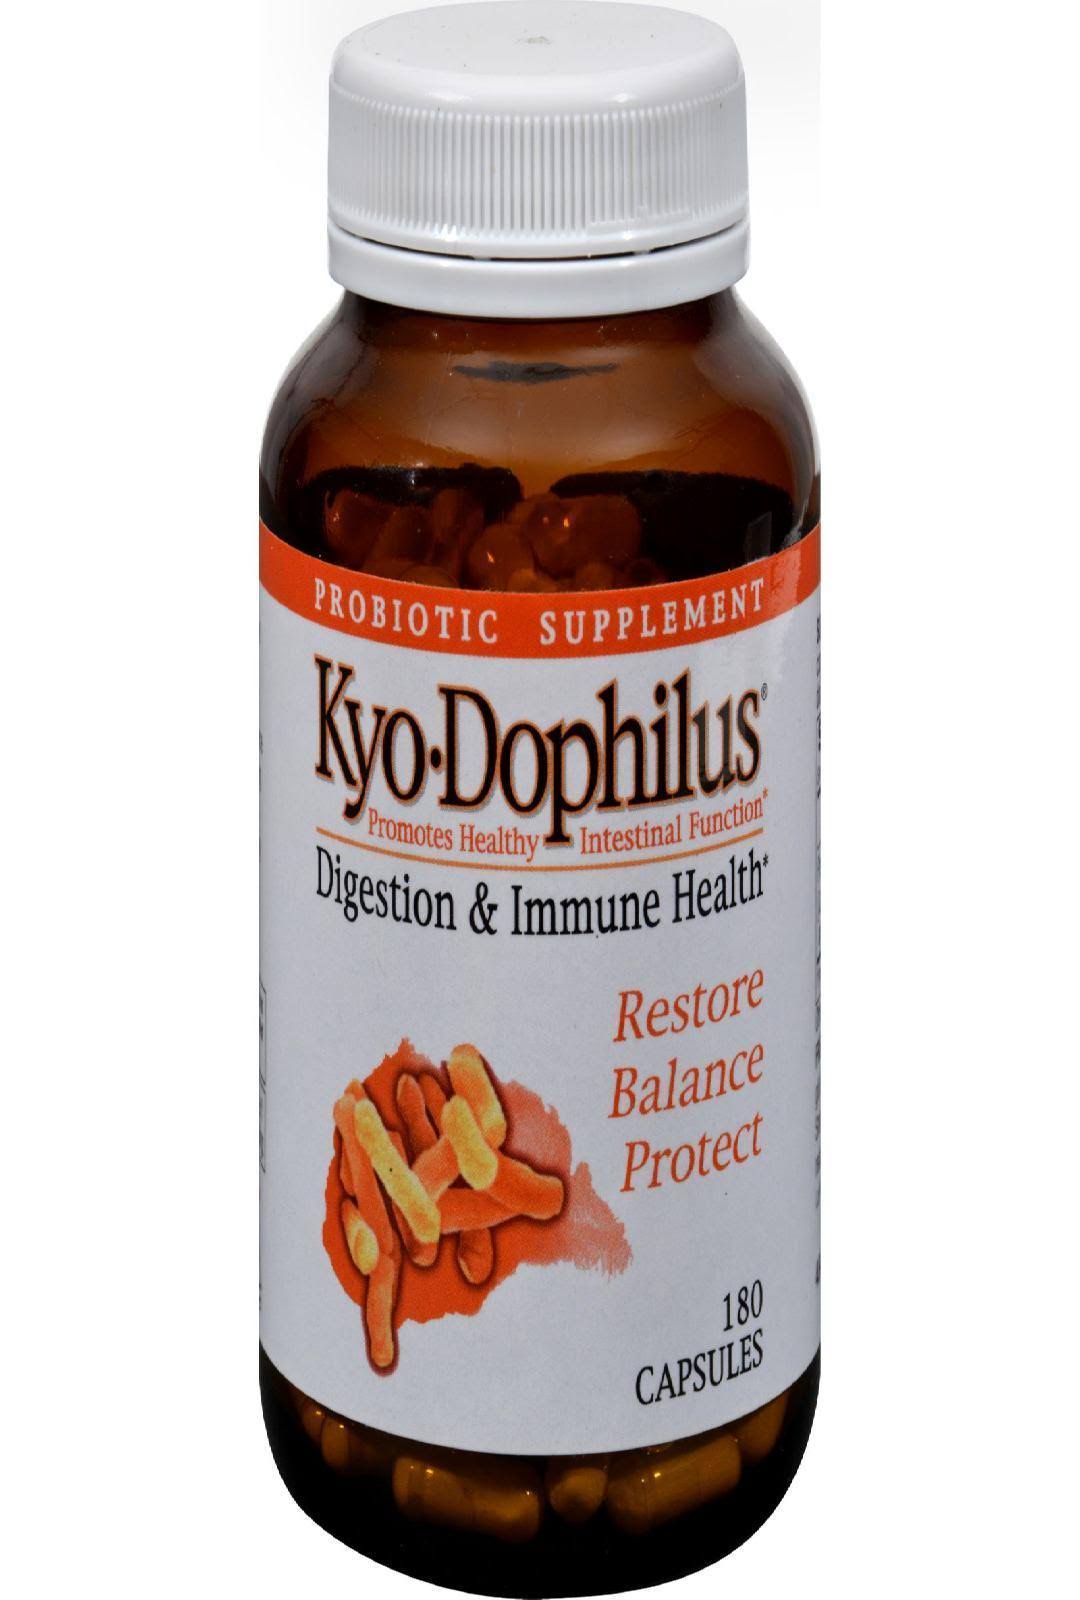 Kyolic Kyo-Dophilus Digestion And Immune Health Probiotic Supplement - 180 Capsules)